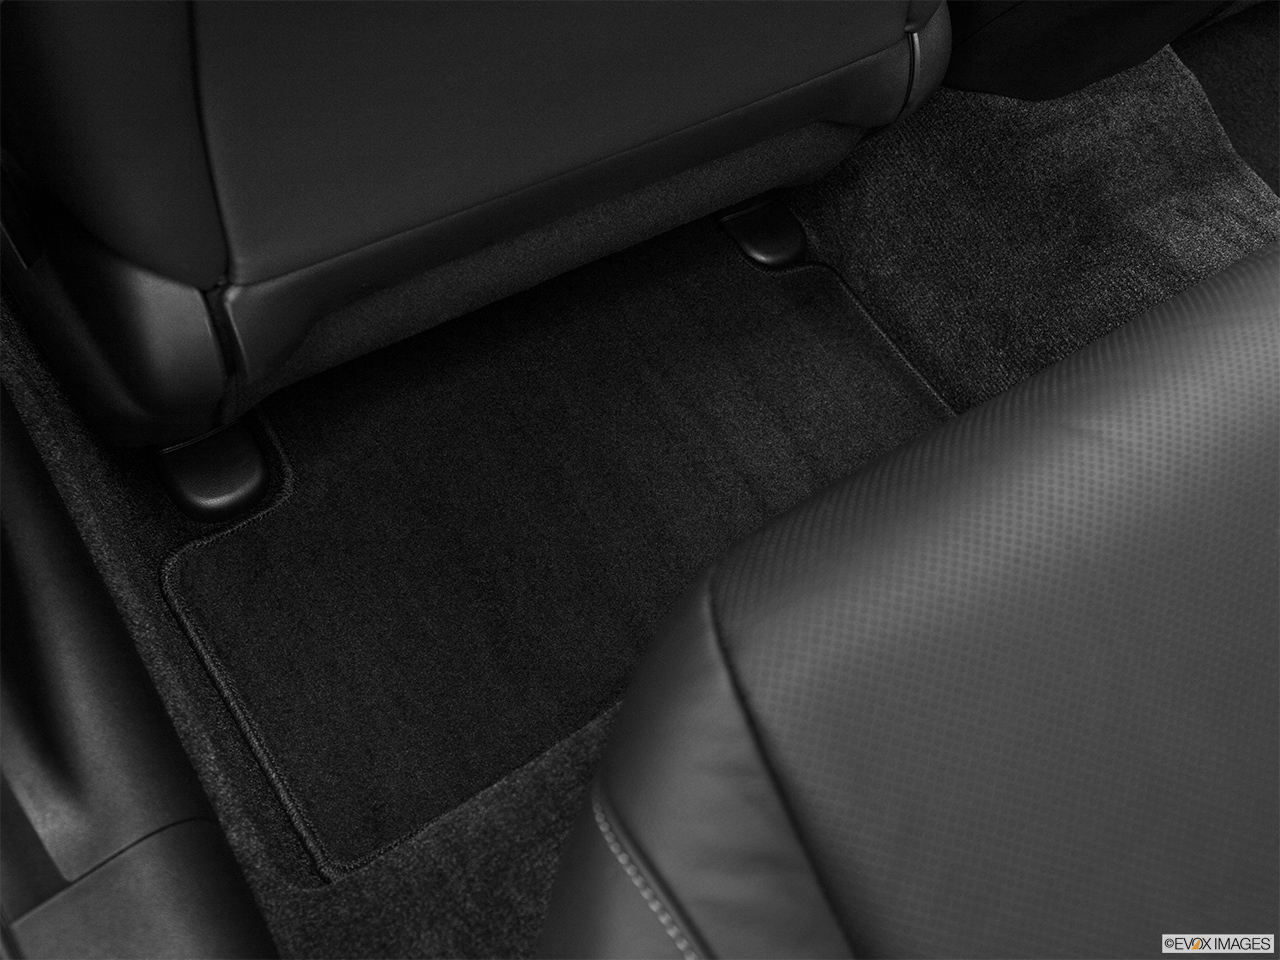 2012 Acura TSX V6 Rear driver's side floor mat. Mid-seat level from outside looking in. 